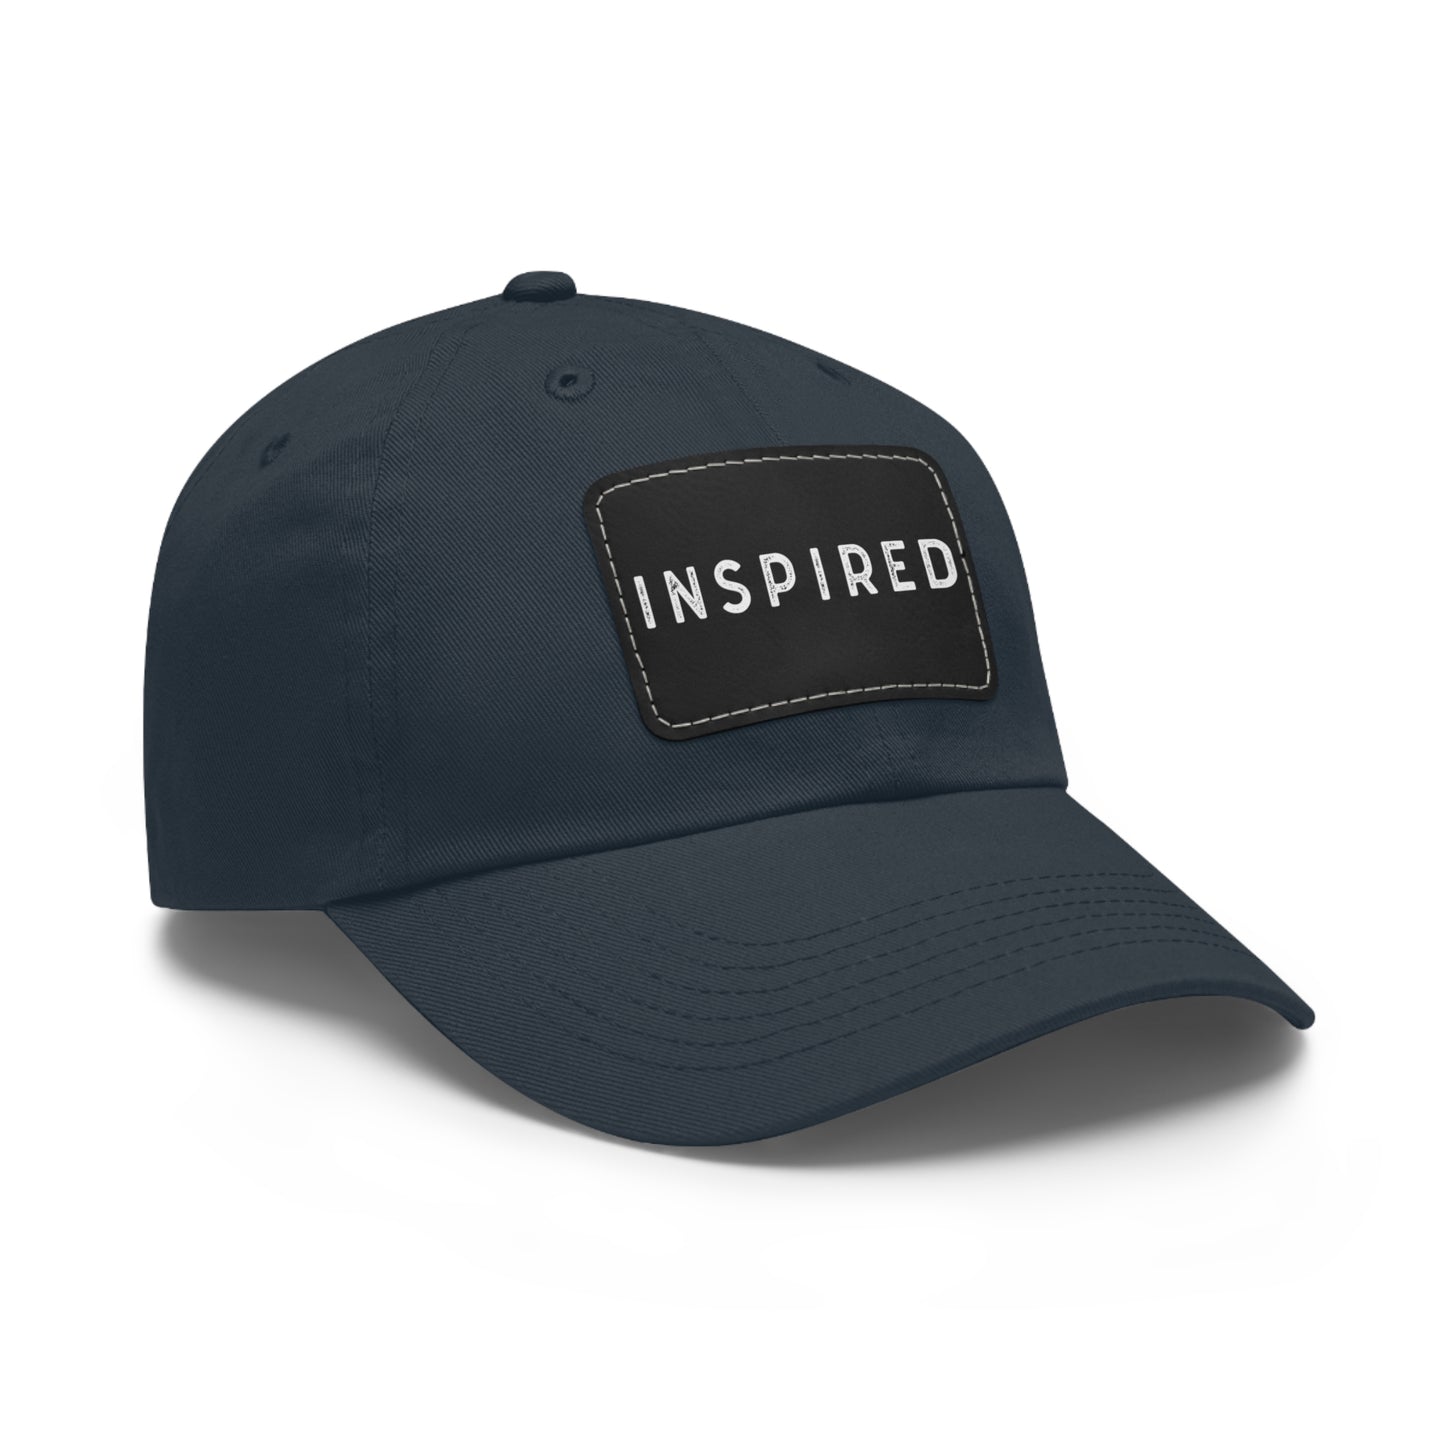 INSPIRED W Hat with Leather Patch